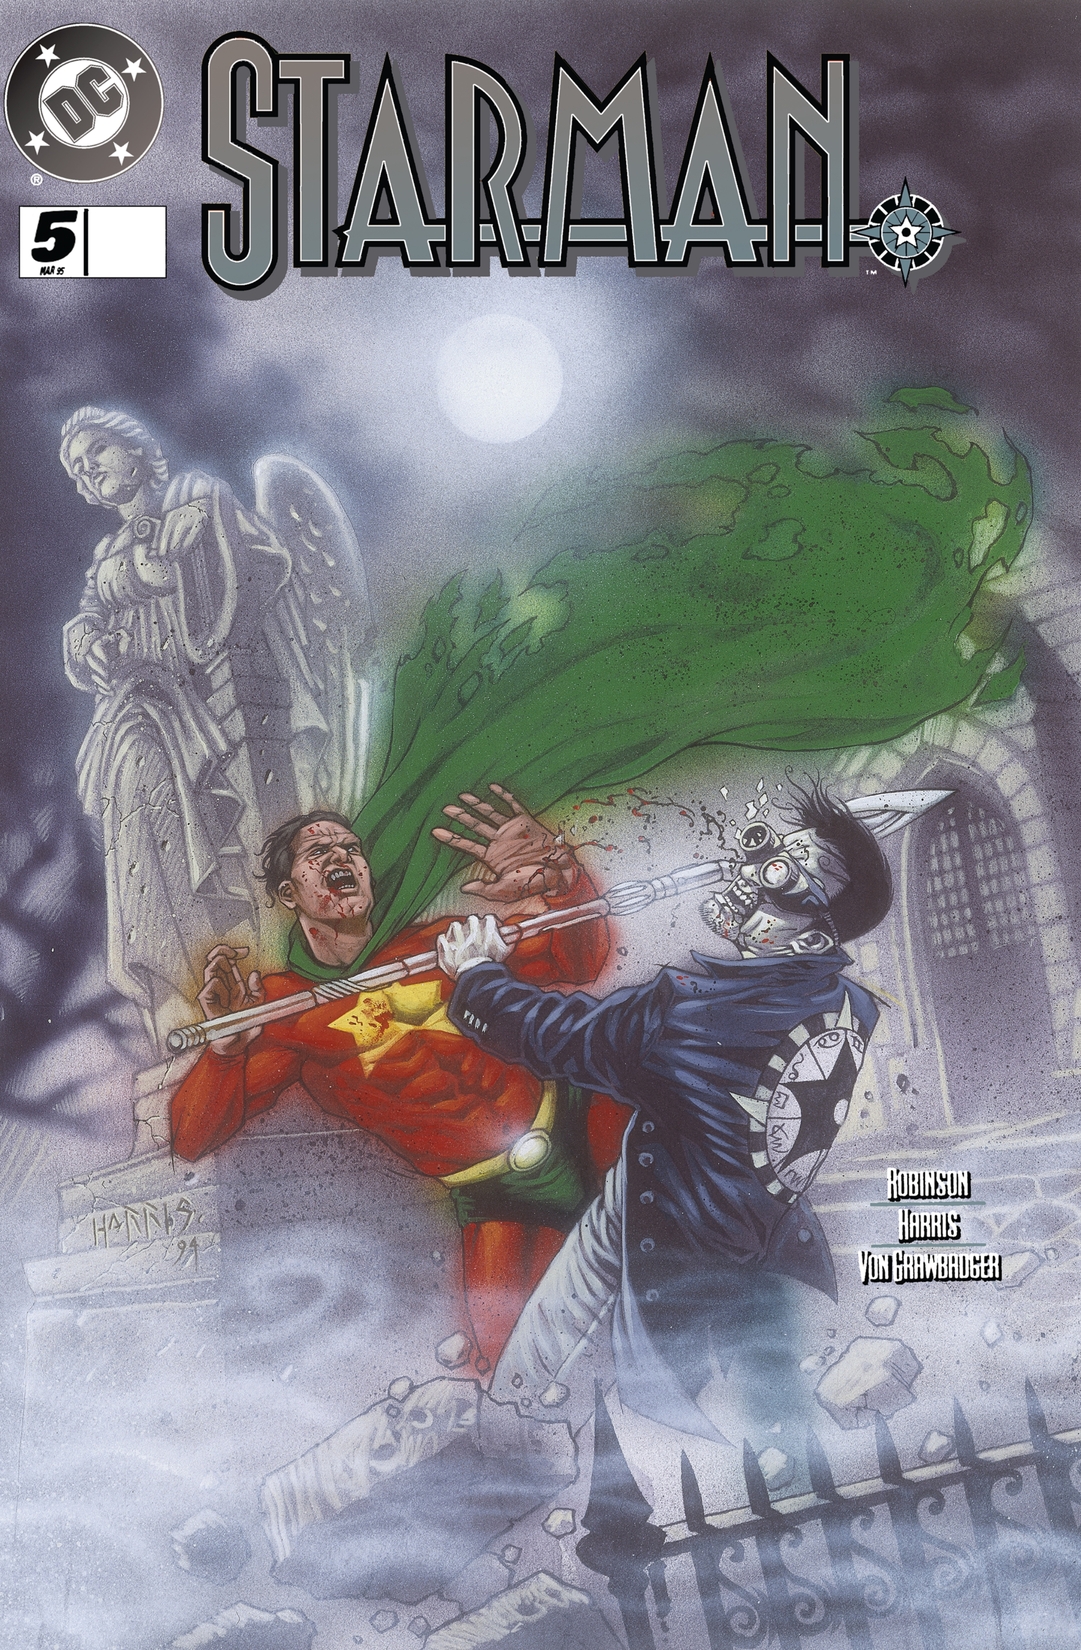 Starman (1994-) #5 preview images